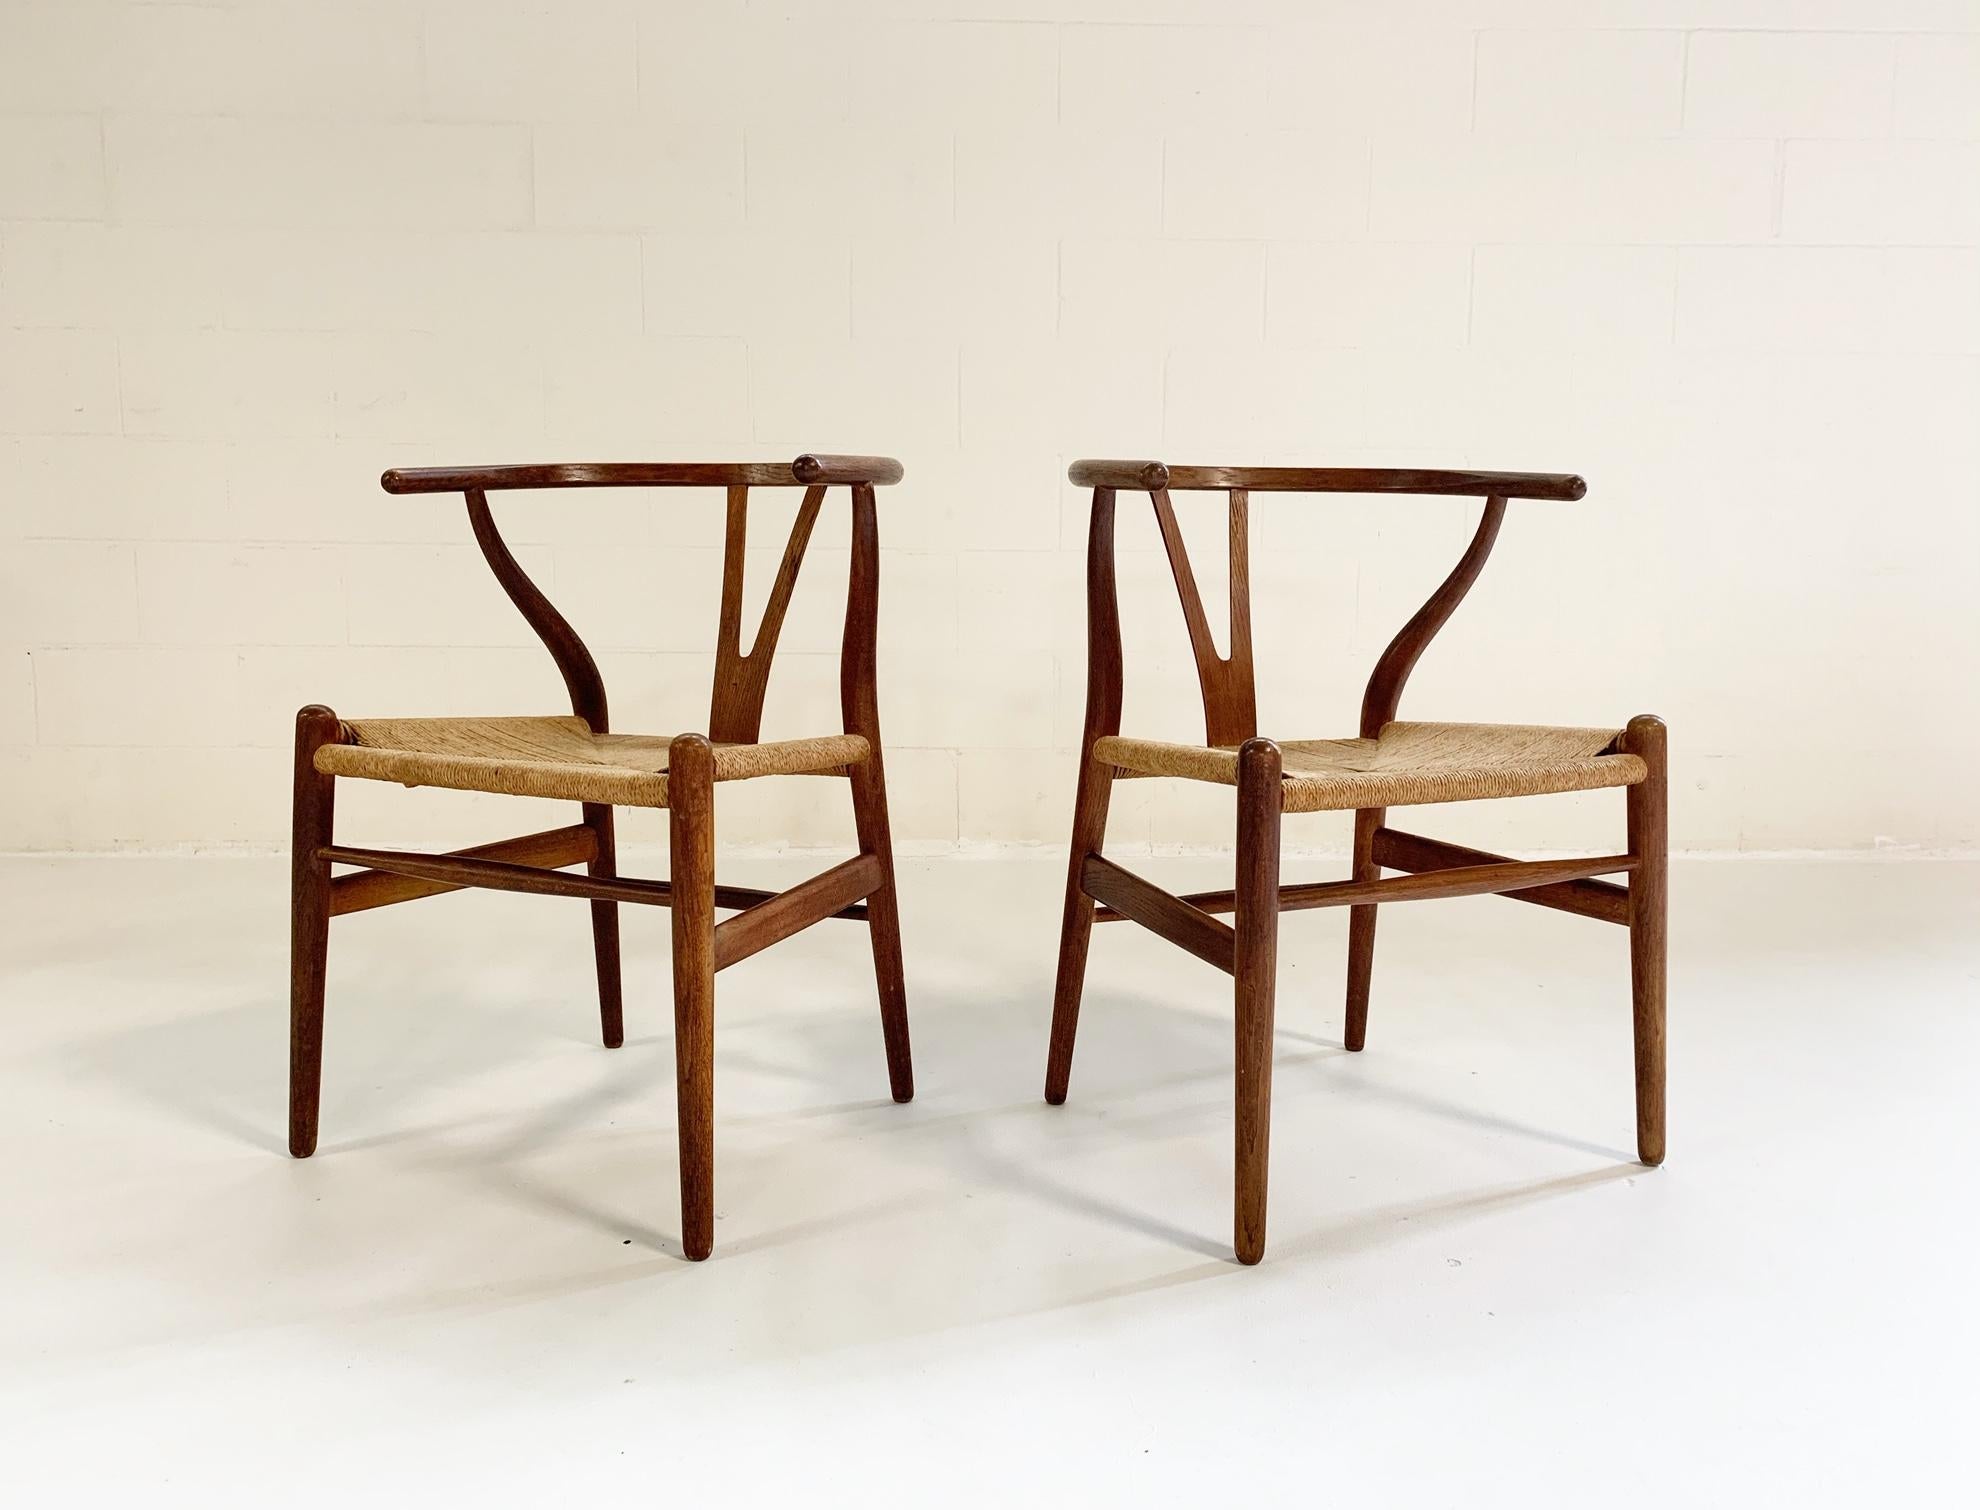 In 1944, Danish designer Hans Wegner began a series of chairs that were inspired by portraits of Danish merchants sitting in Ming Chairs. One of these was the Wishbone Chair, also known as the 